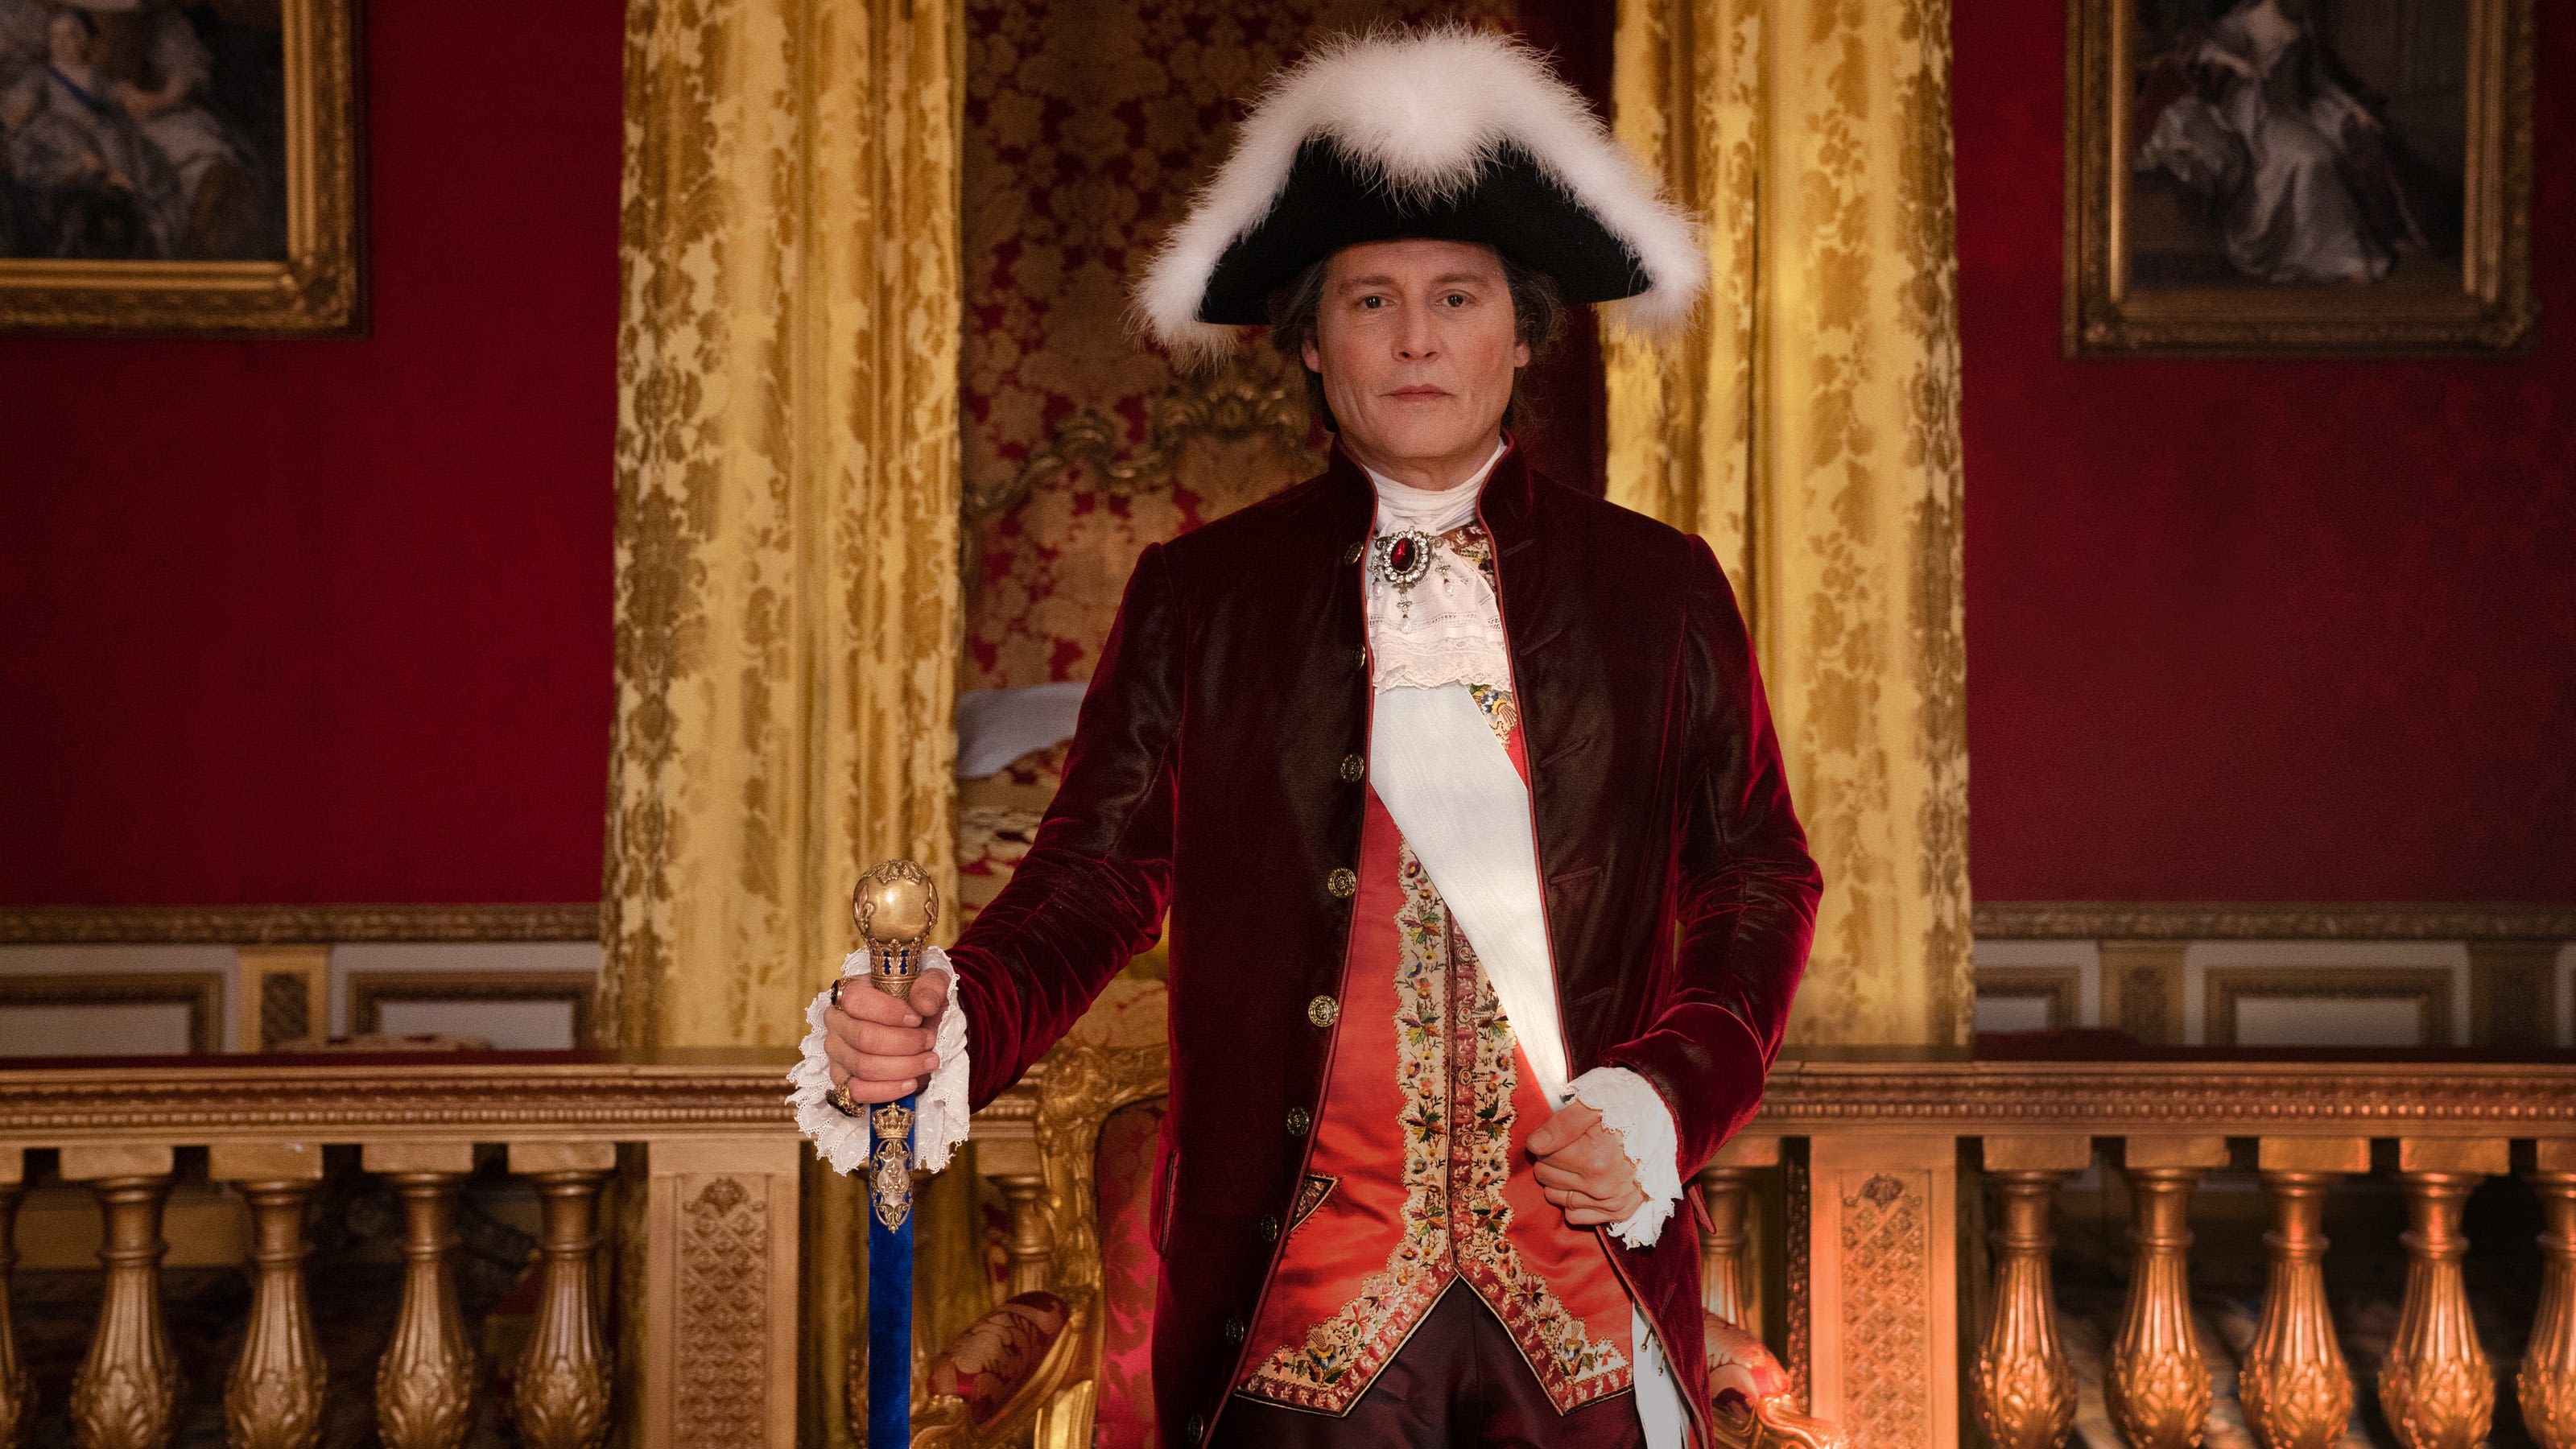 Former pirate Johnny Depp returns to the screen as King Louis XV. But will audiences care?